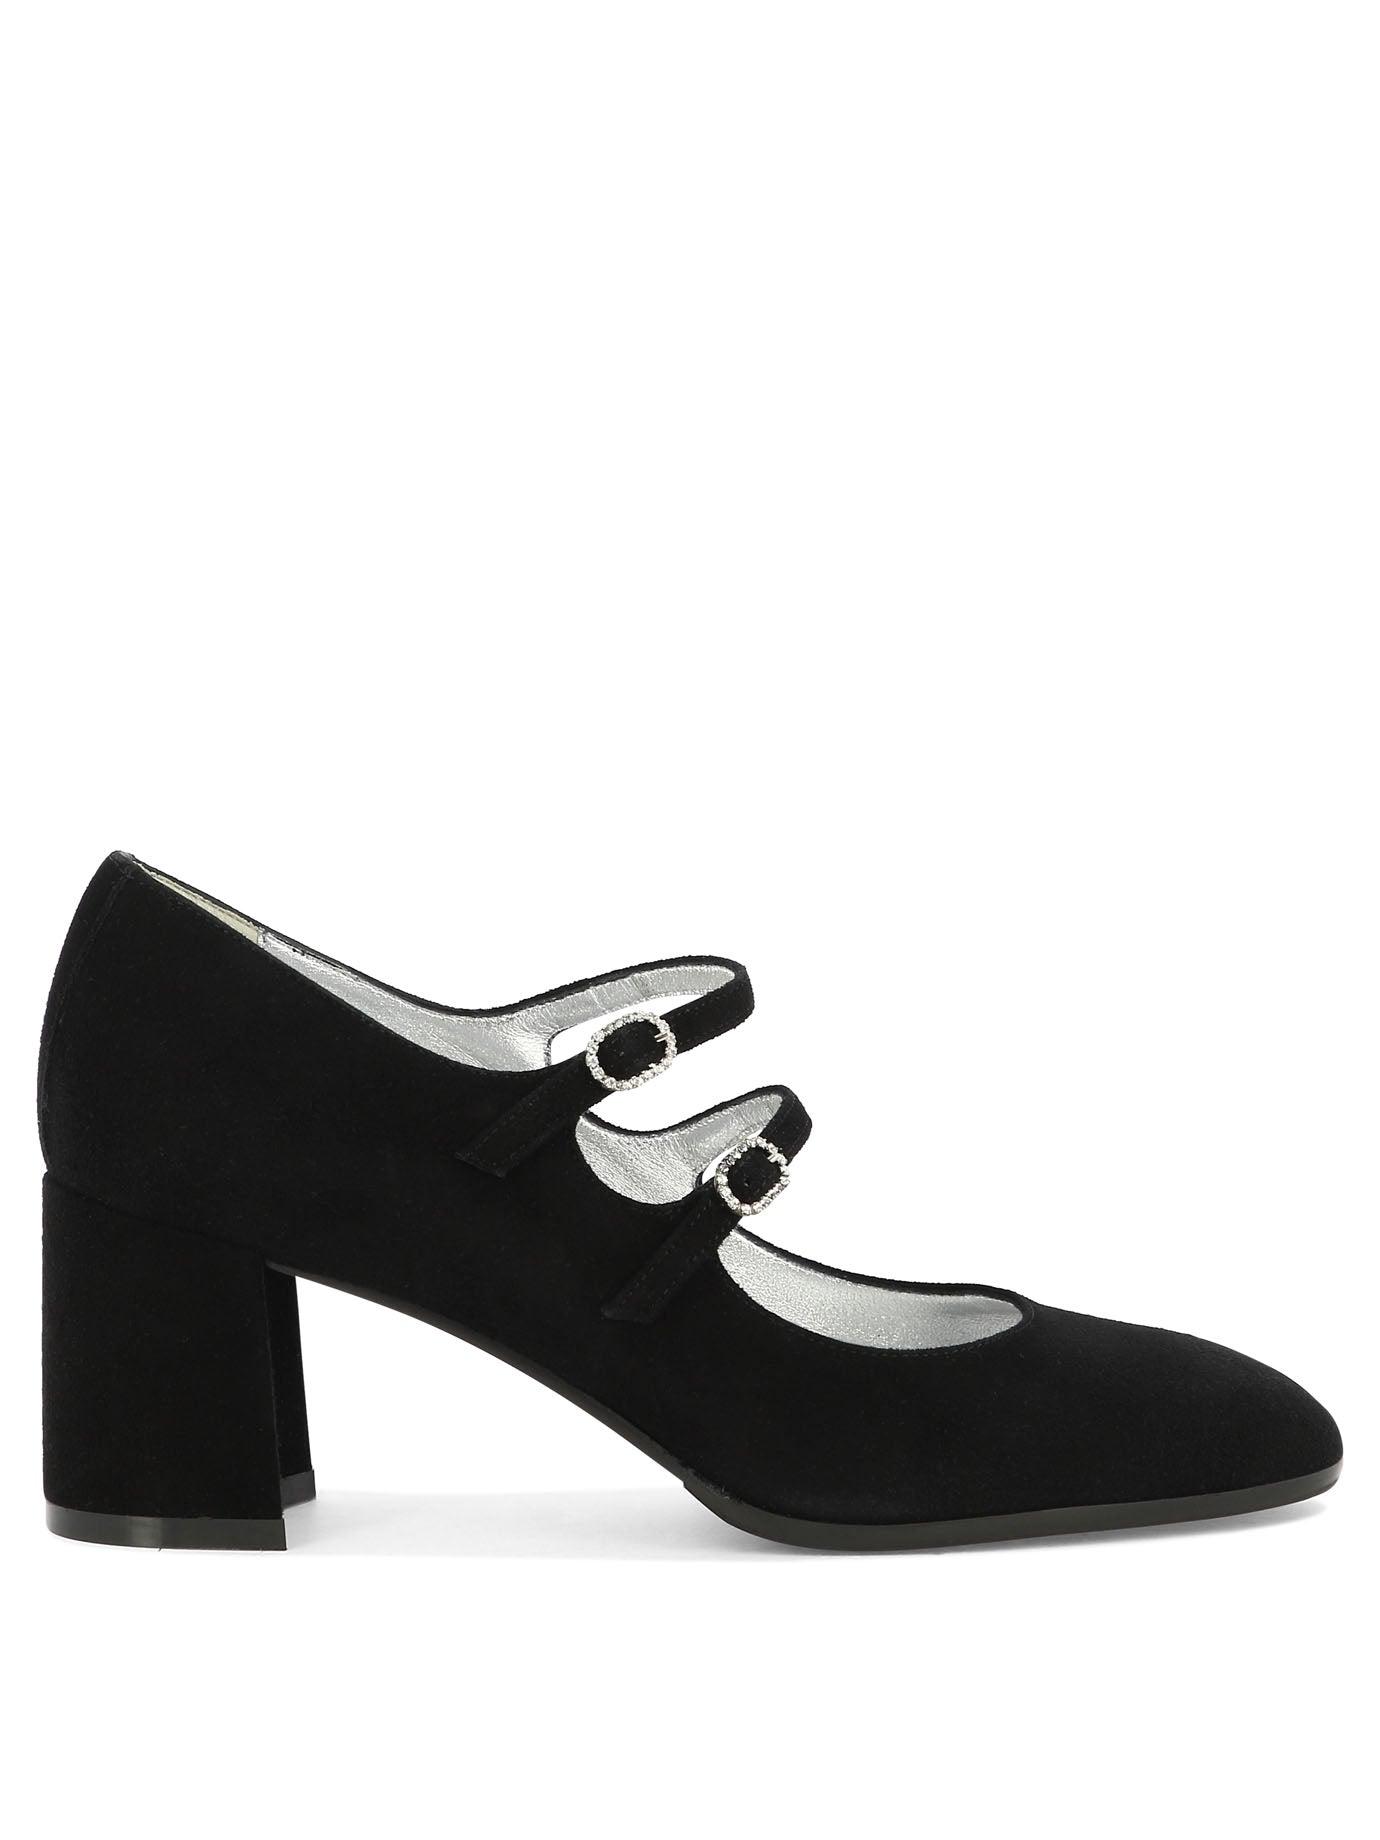 CAREL Alice Mary Janes in Black | Lyst